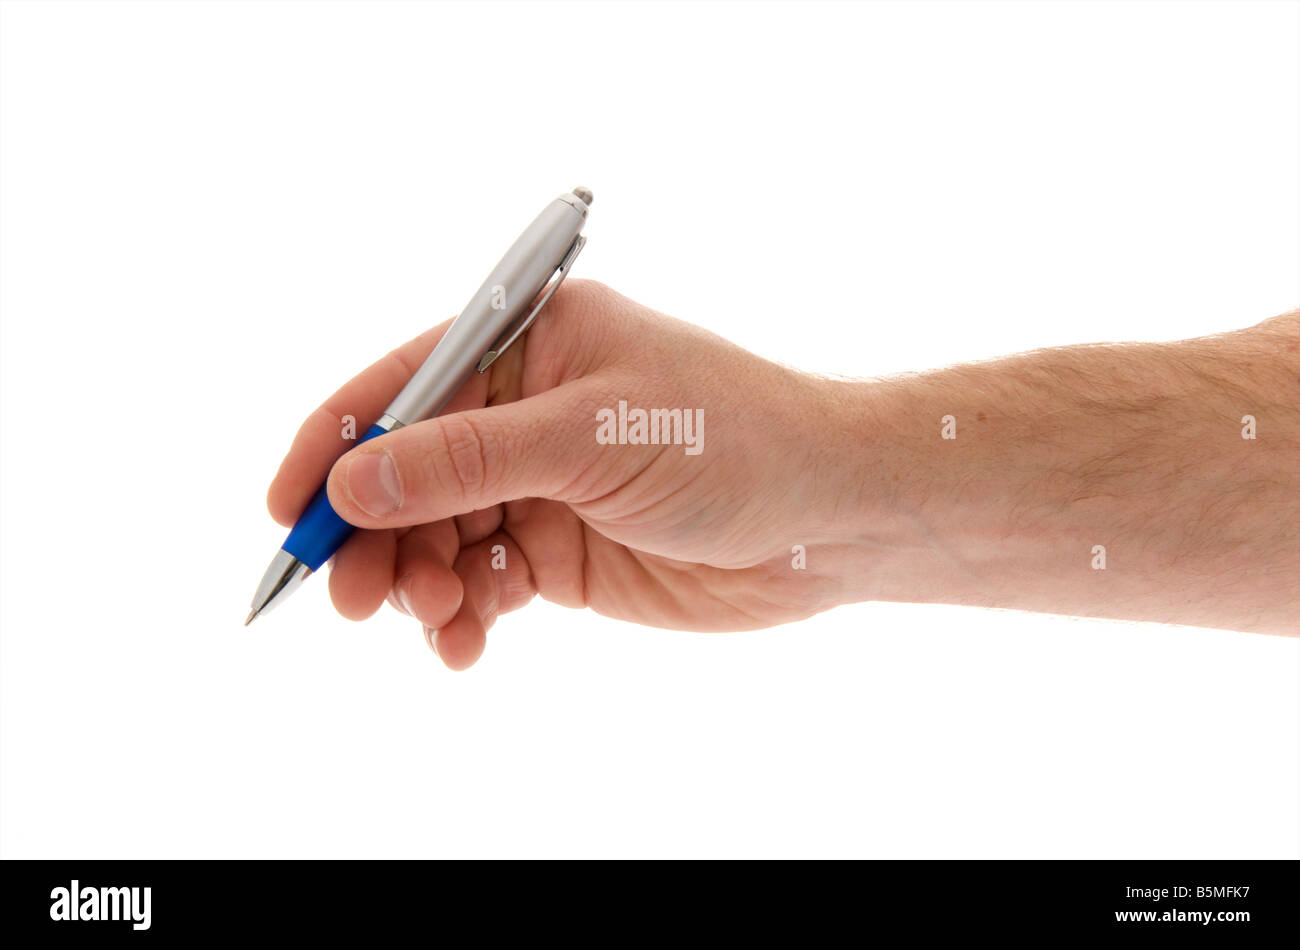 mans male right outstretched hand holding a pen against a white background Stock Photo